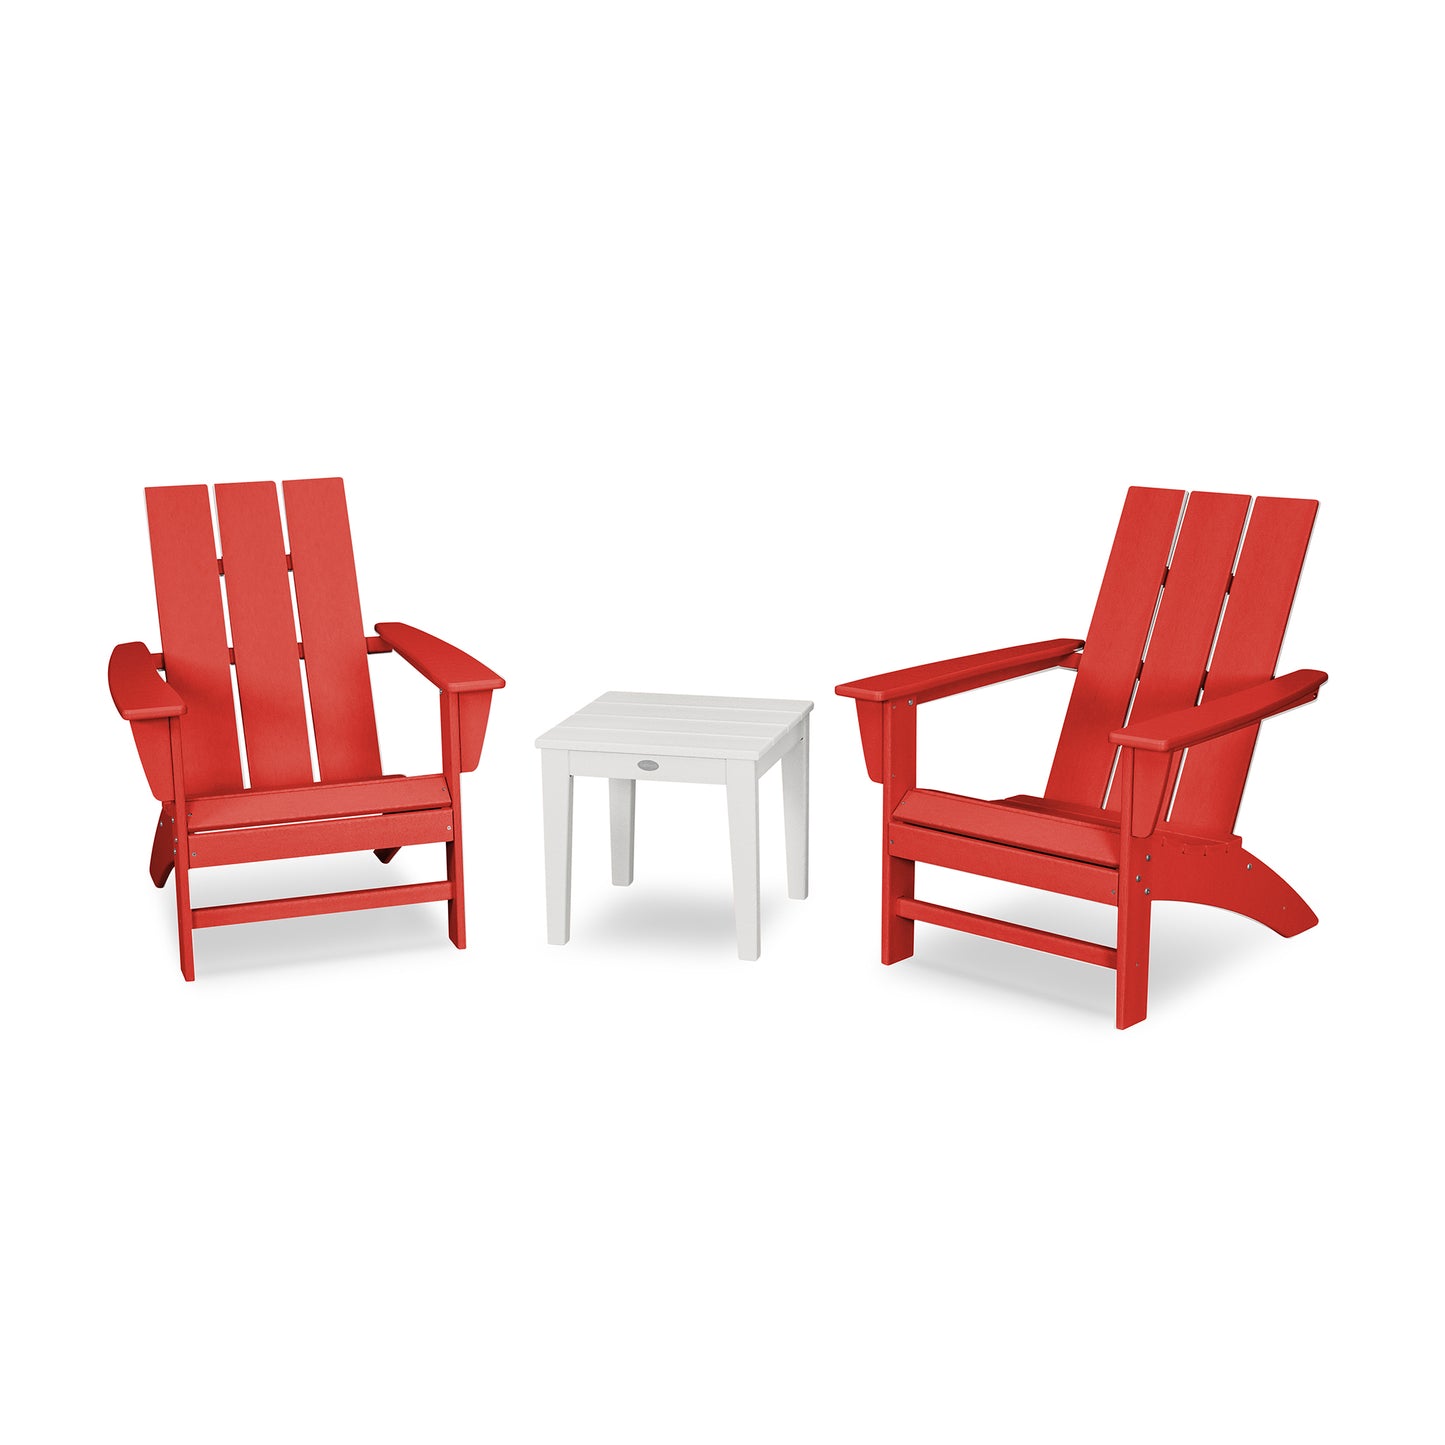 Two red POLYWOOD Modern Adirondack Chairs flanking a small white side table, set against an isolated white background.